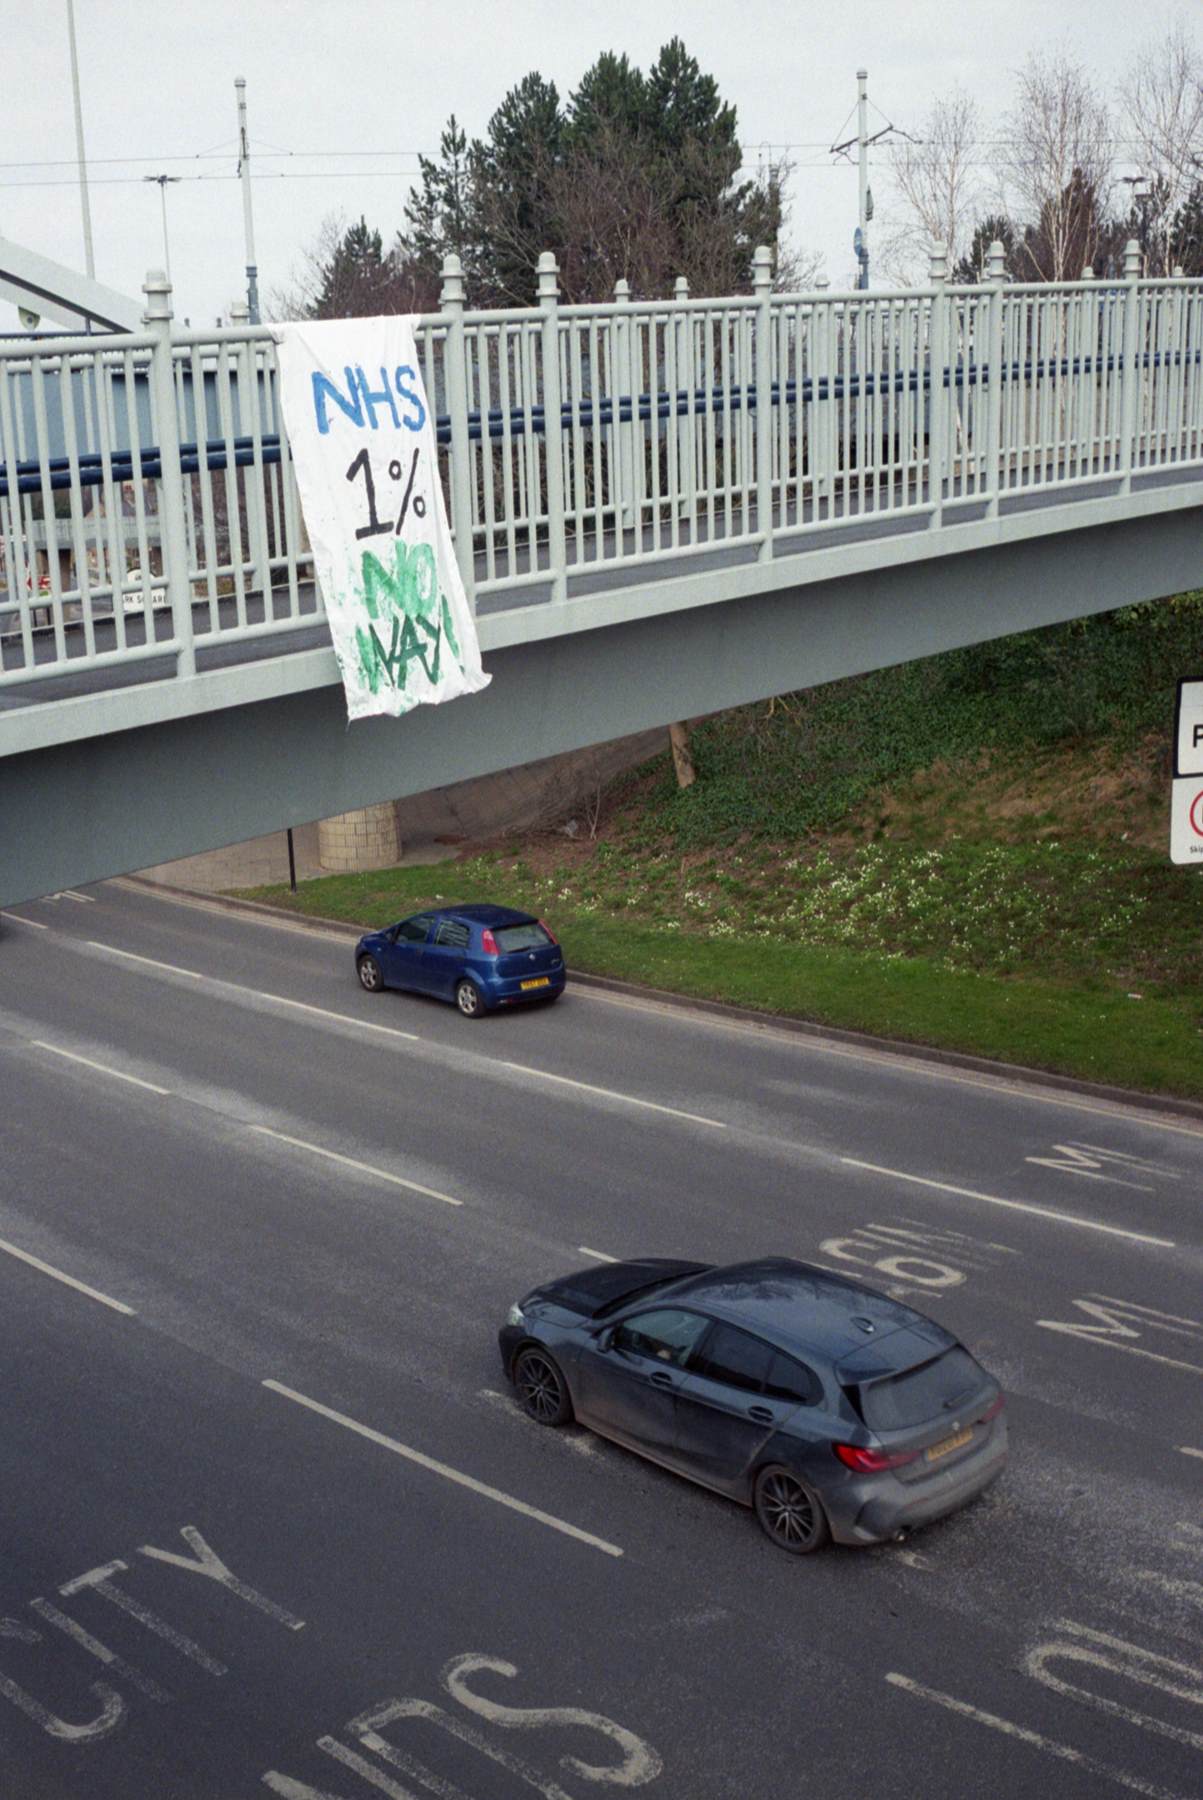 a protestor sign hangs from walkway over road protesting a weak NHS payrise 